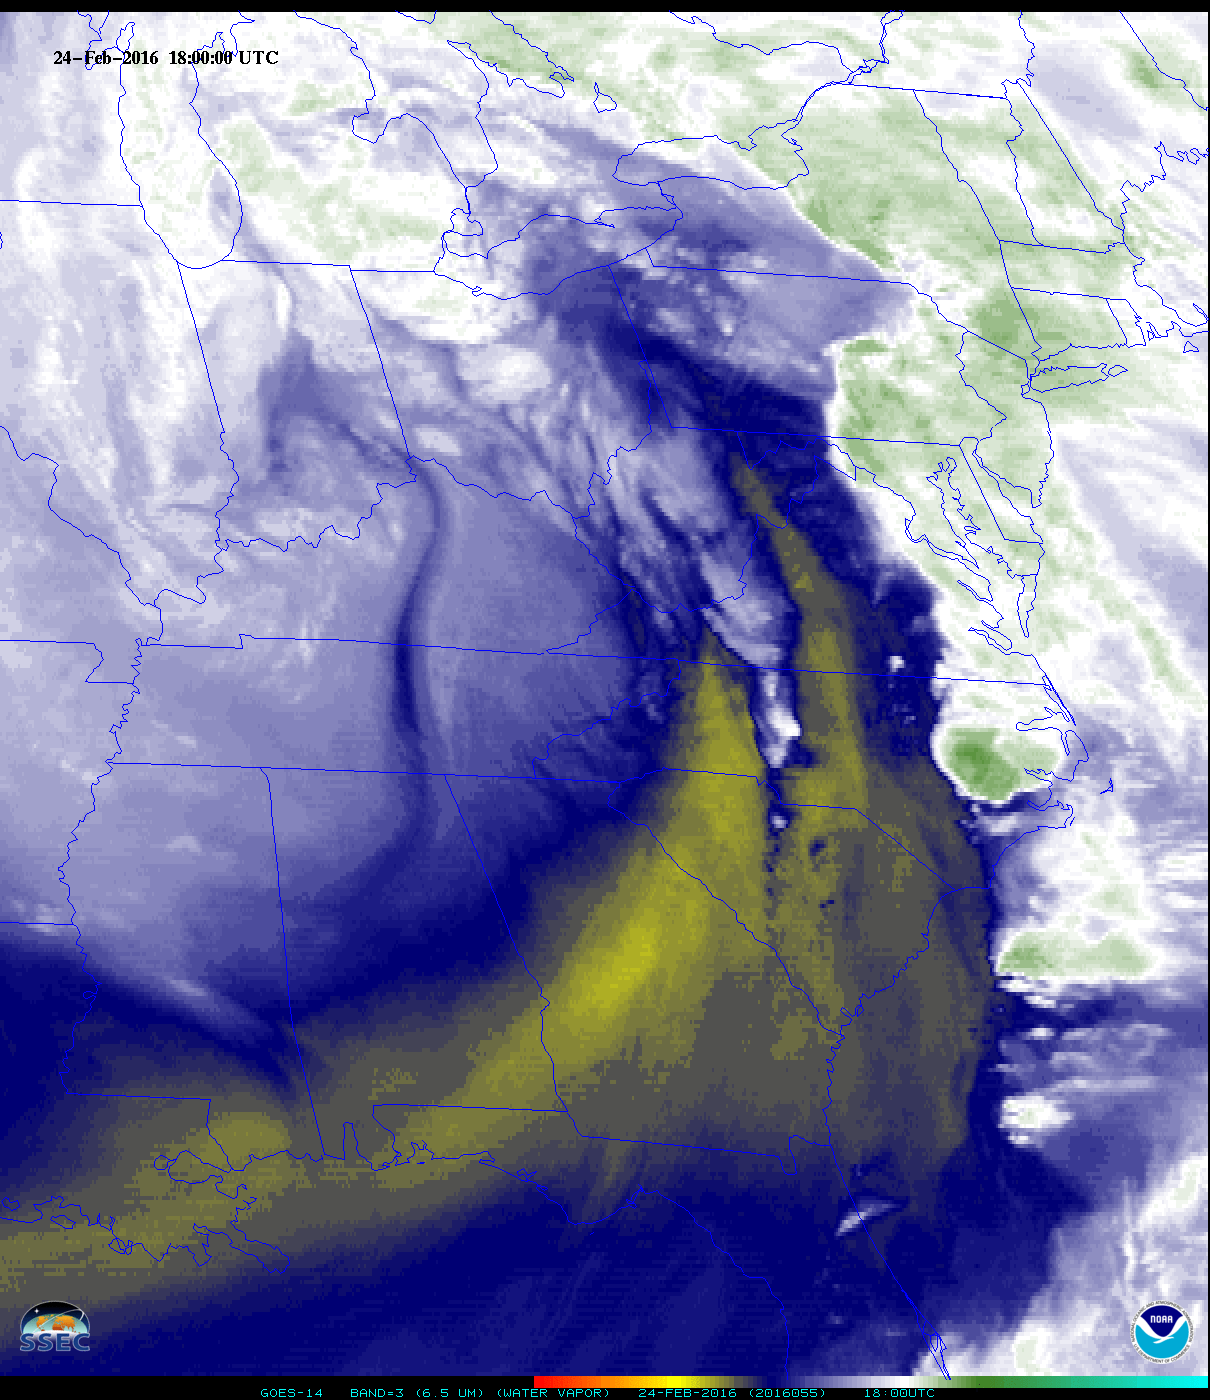 GOES-14 Water Vapor Infrared (6.5 µm) images [click to play mp4 animation]